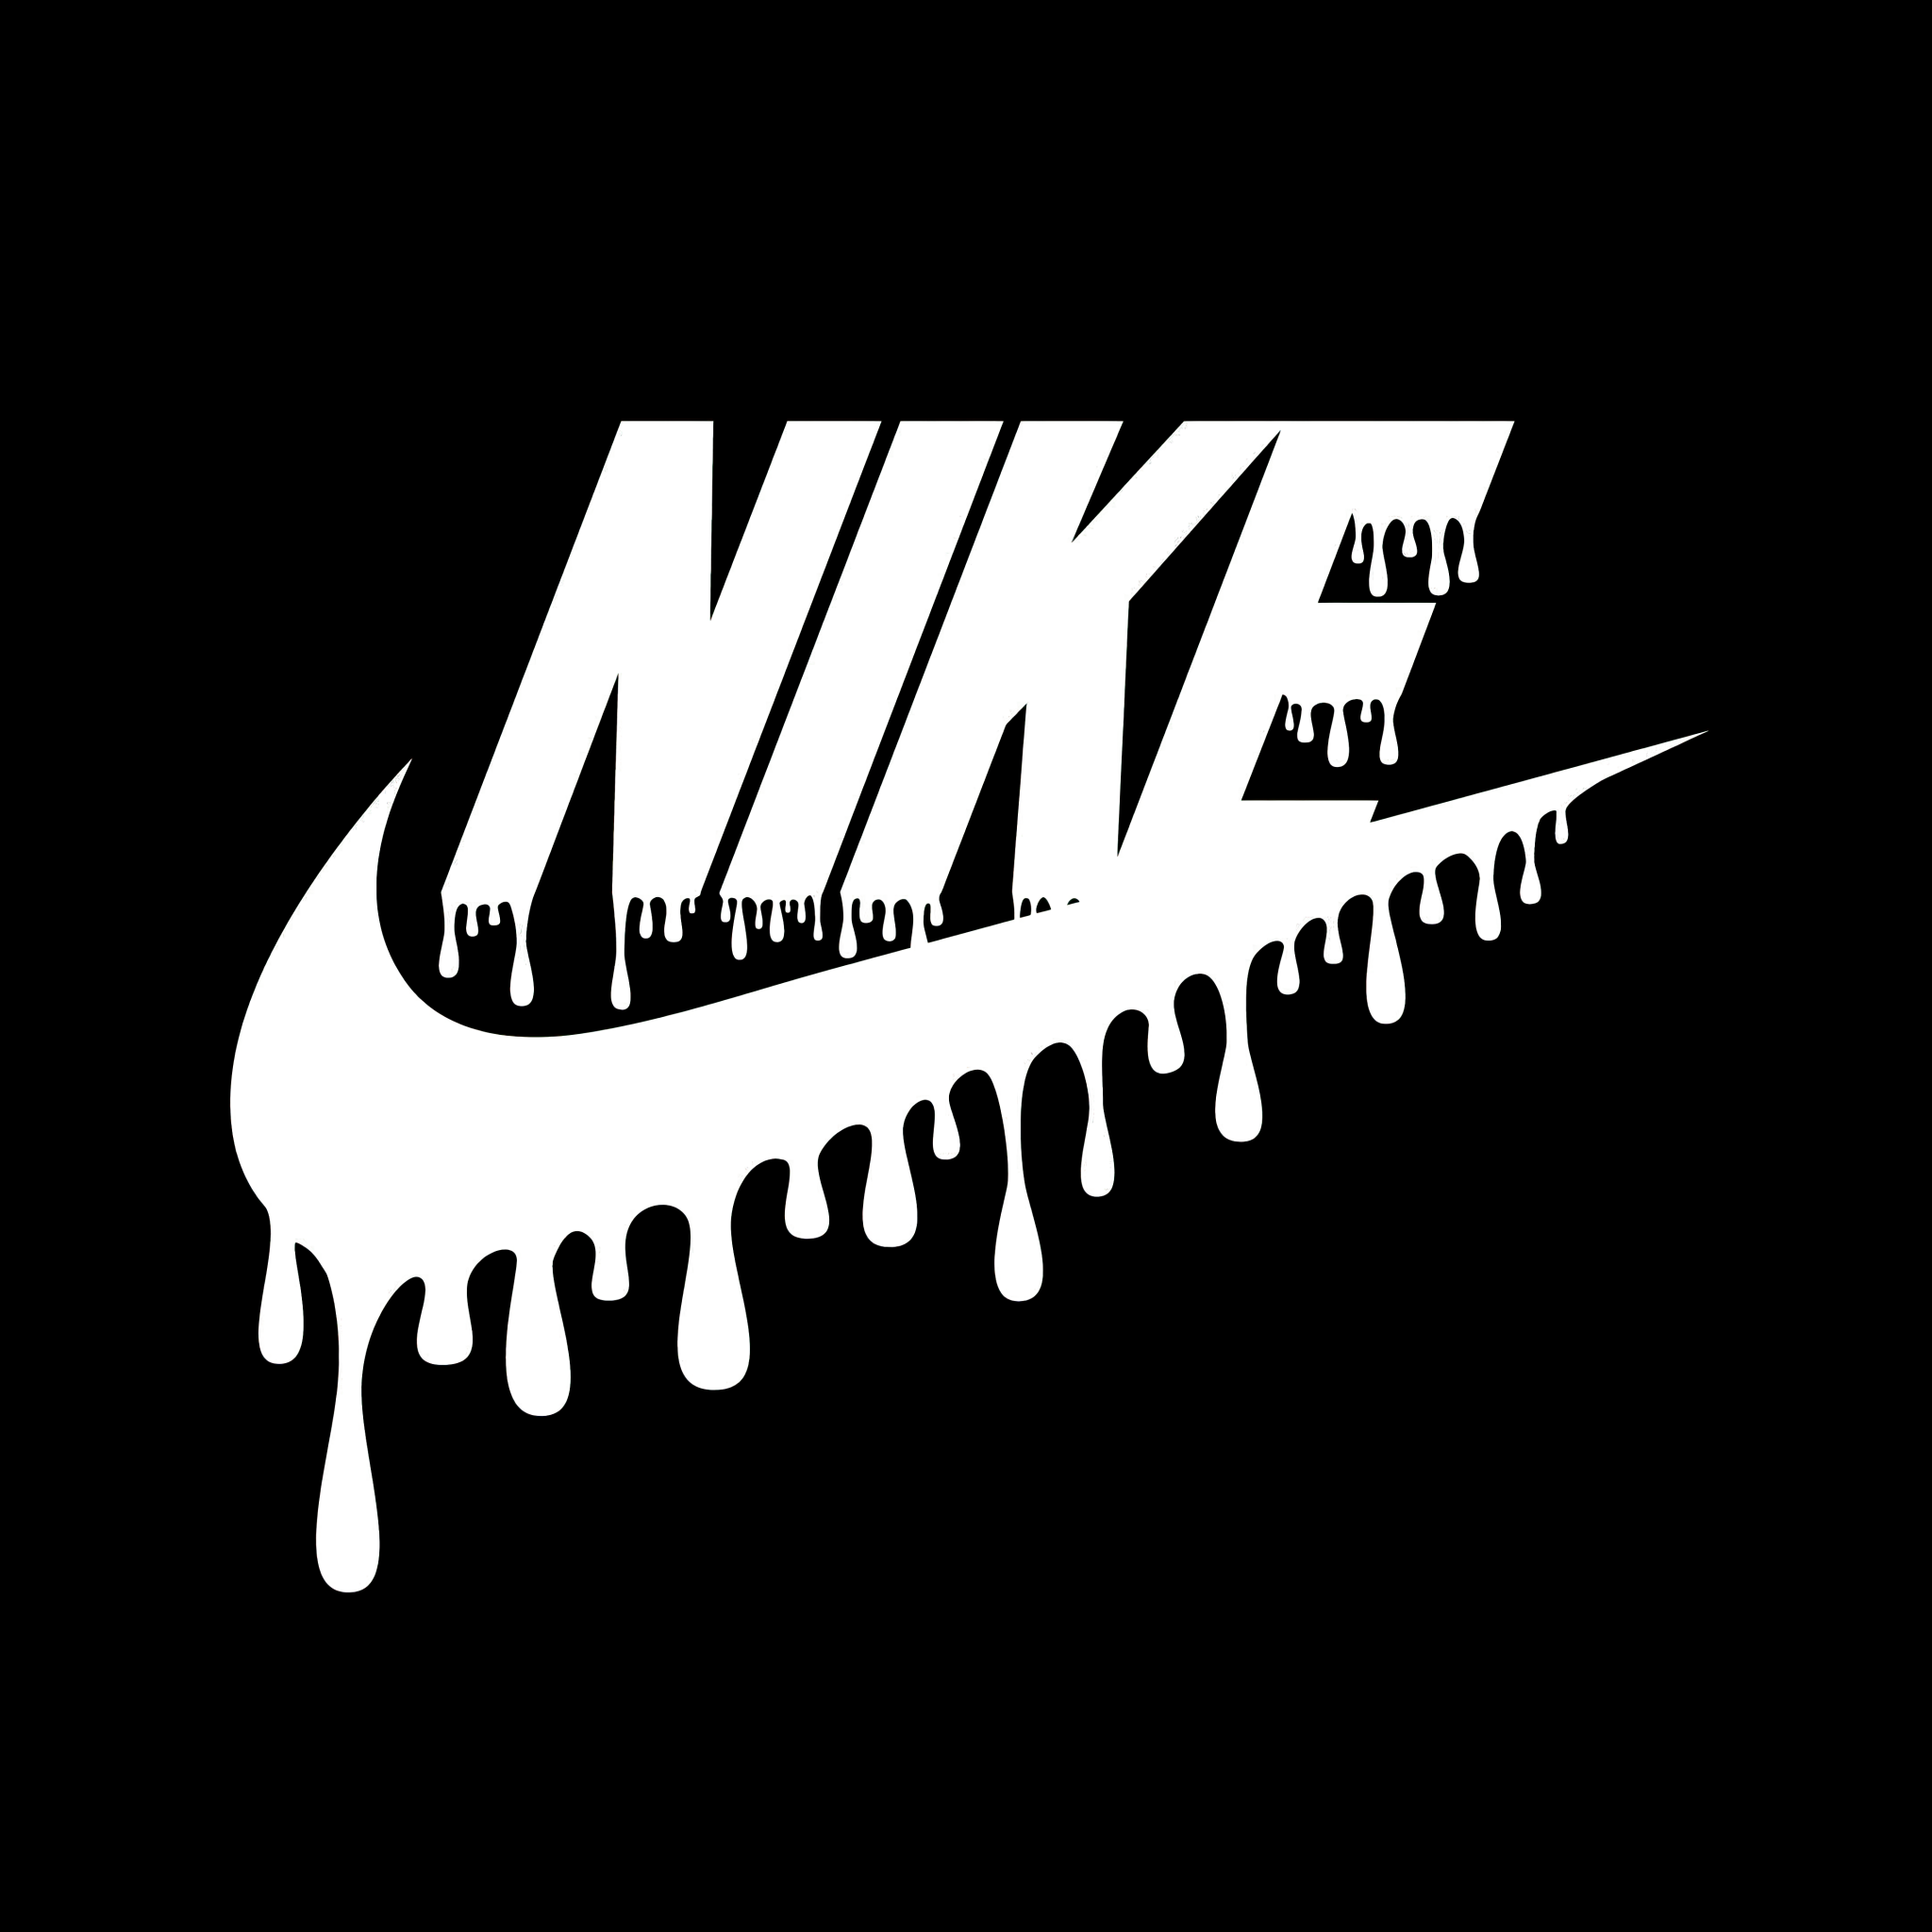 Download Check Out the Latest Black Nike Athletic Gear Wallpaper   Wallpaperscom